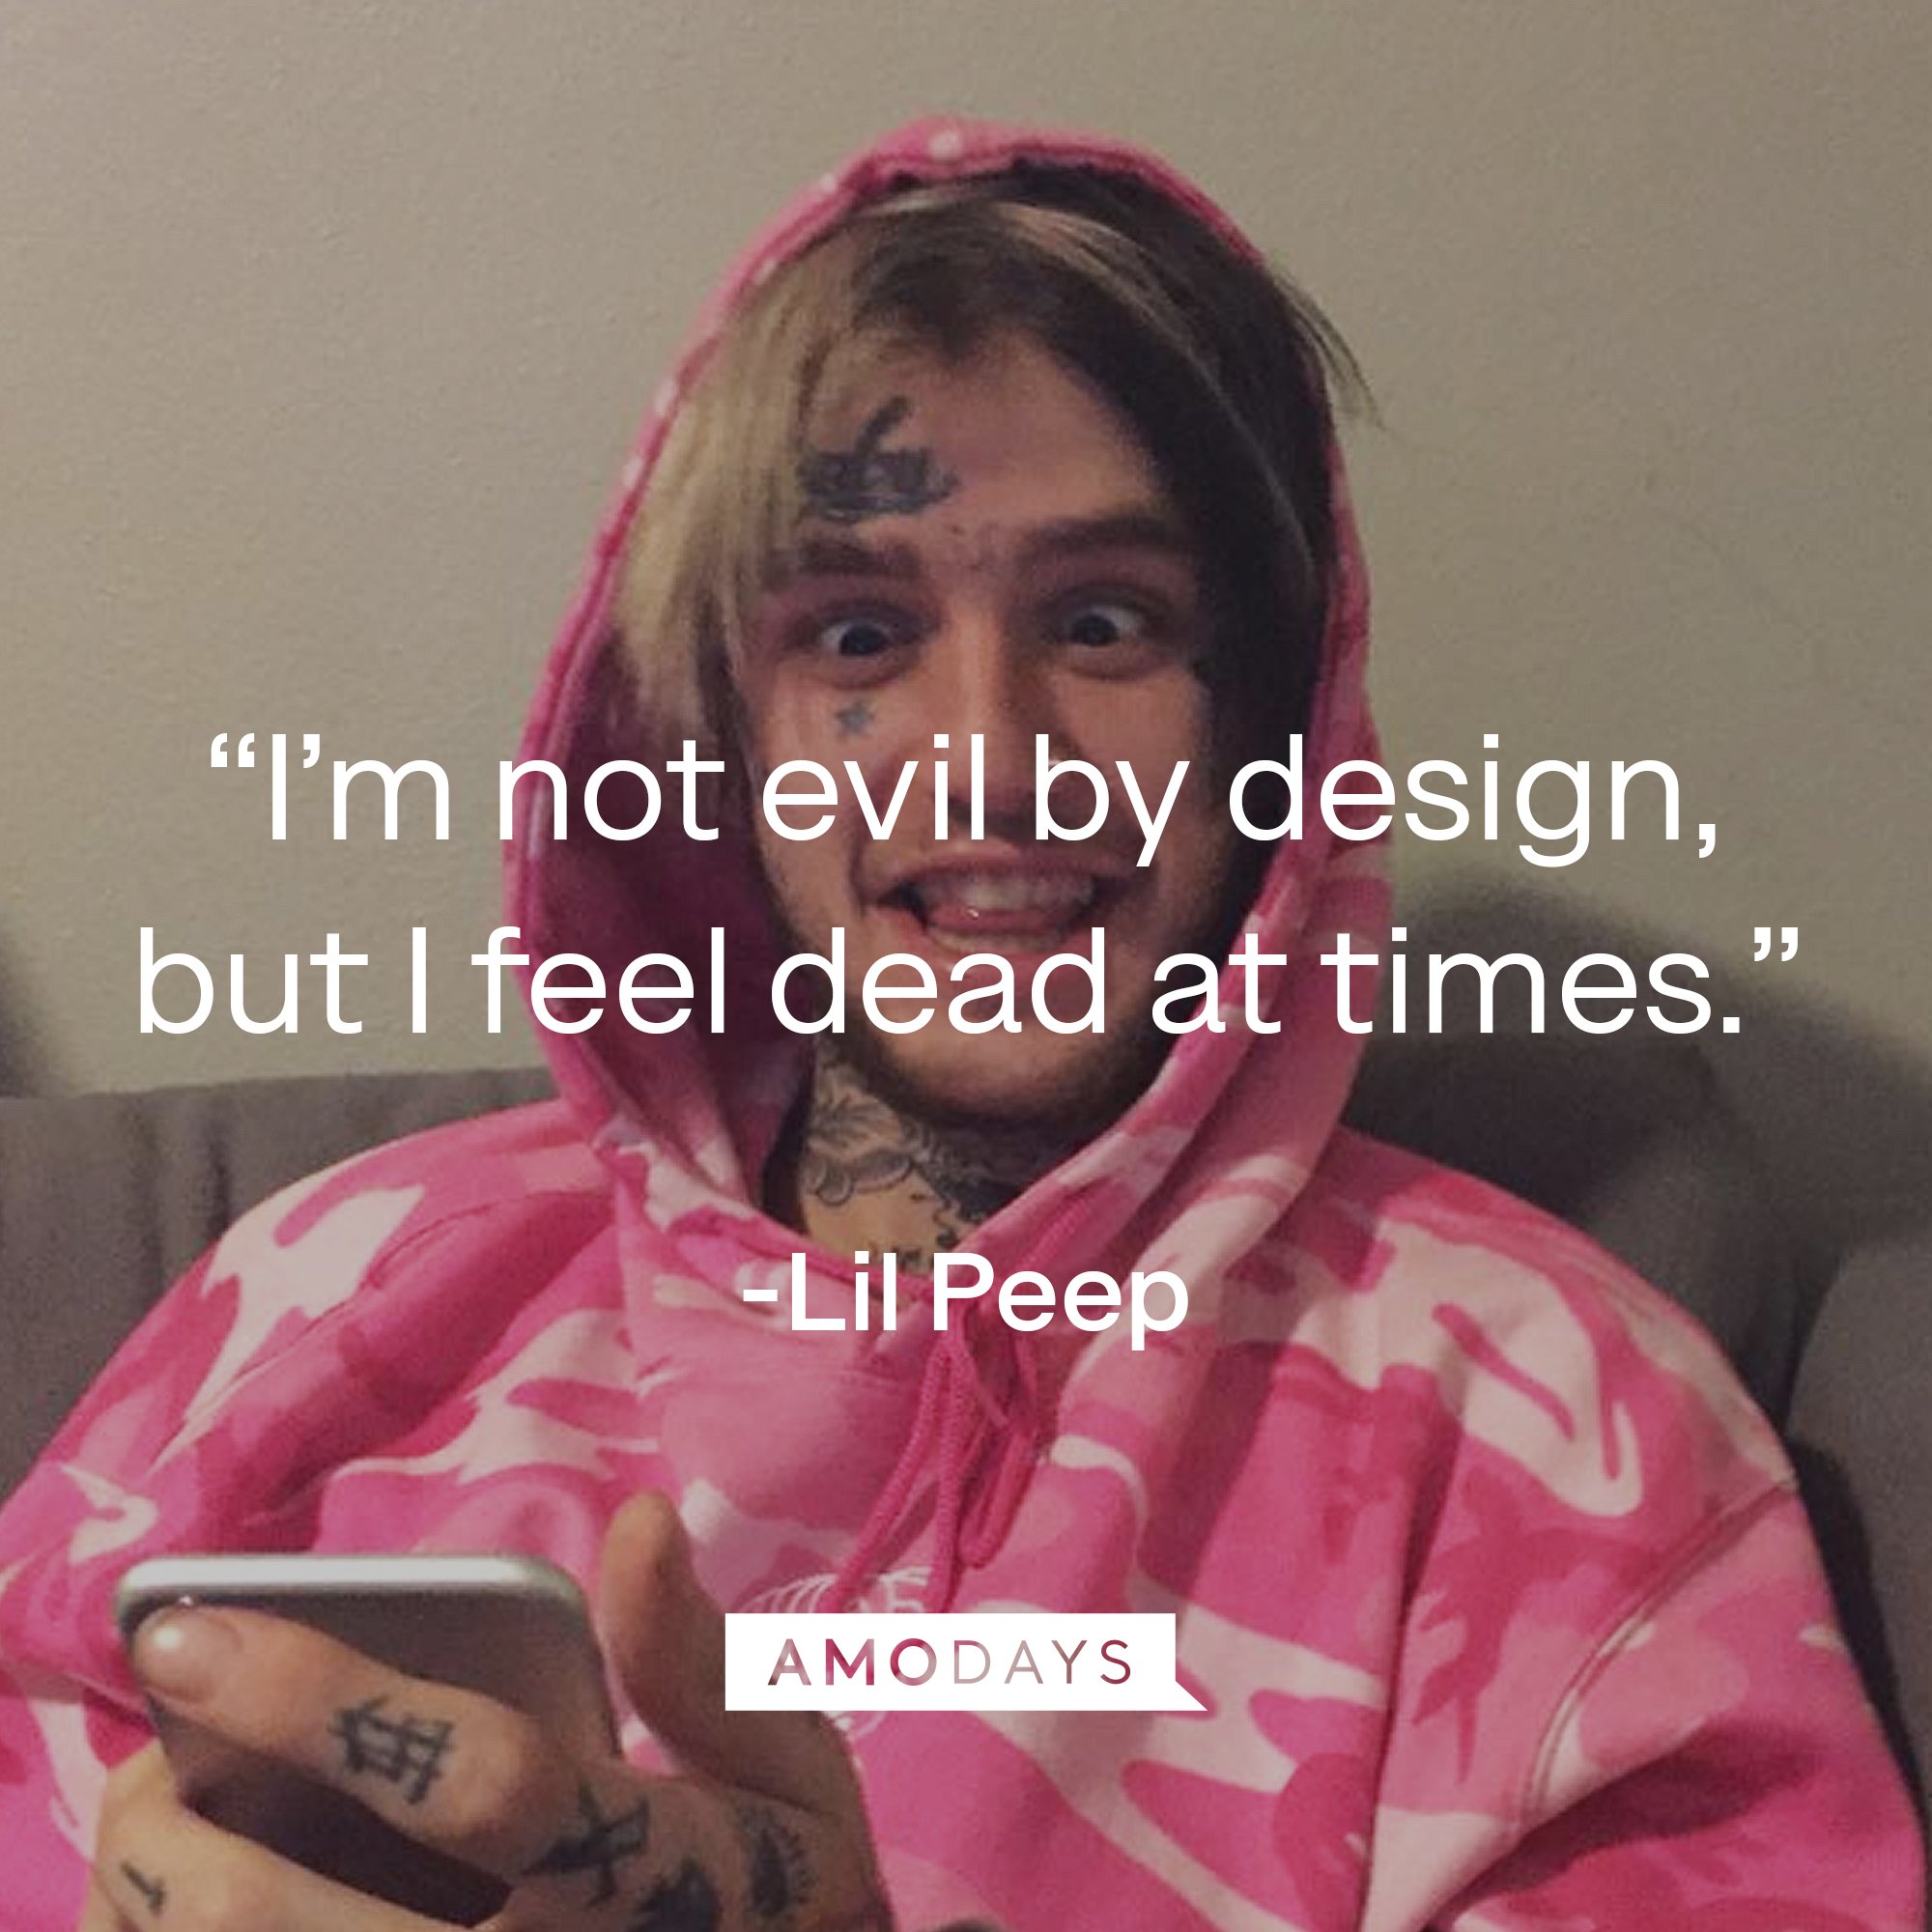 Lil Peep's quote: “I’m not evil by design, but I feel dead at times.” | Image: AmoDays